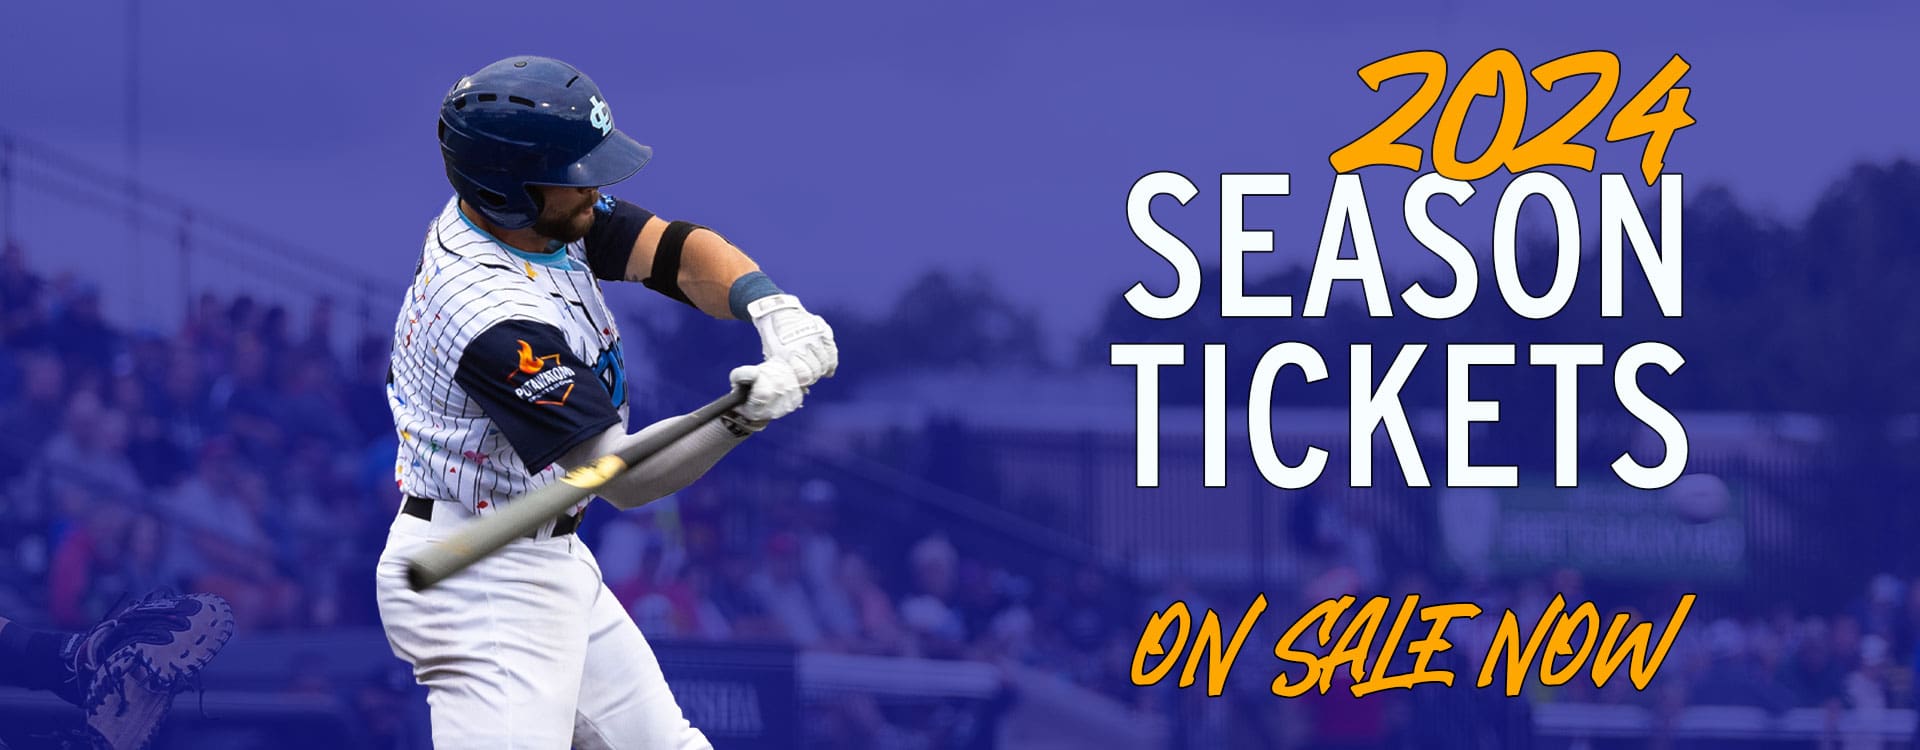 2024 Season Tickets are on sale now